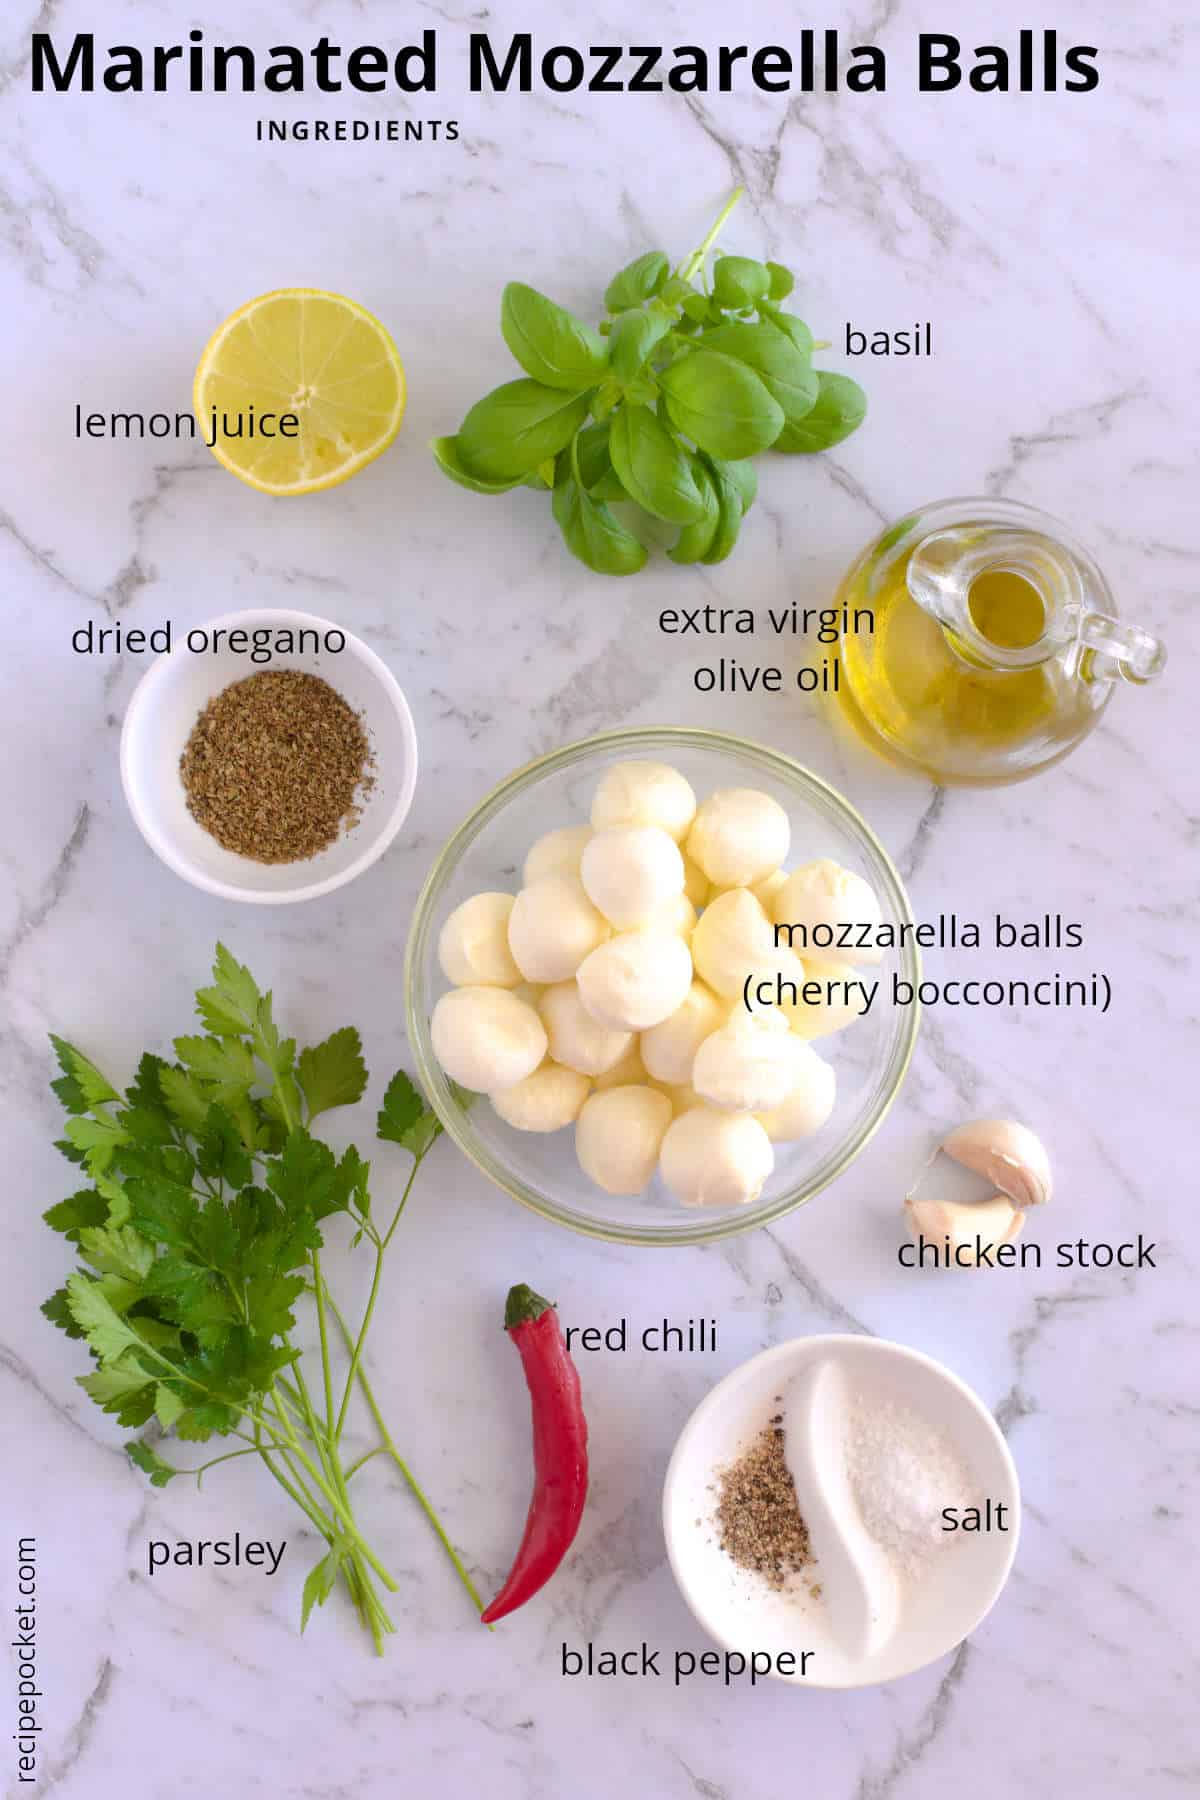 Image showing the ingredients needed to make marinated mozzarella.